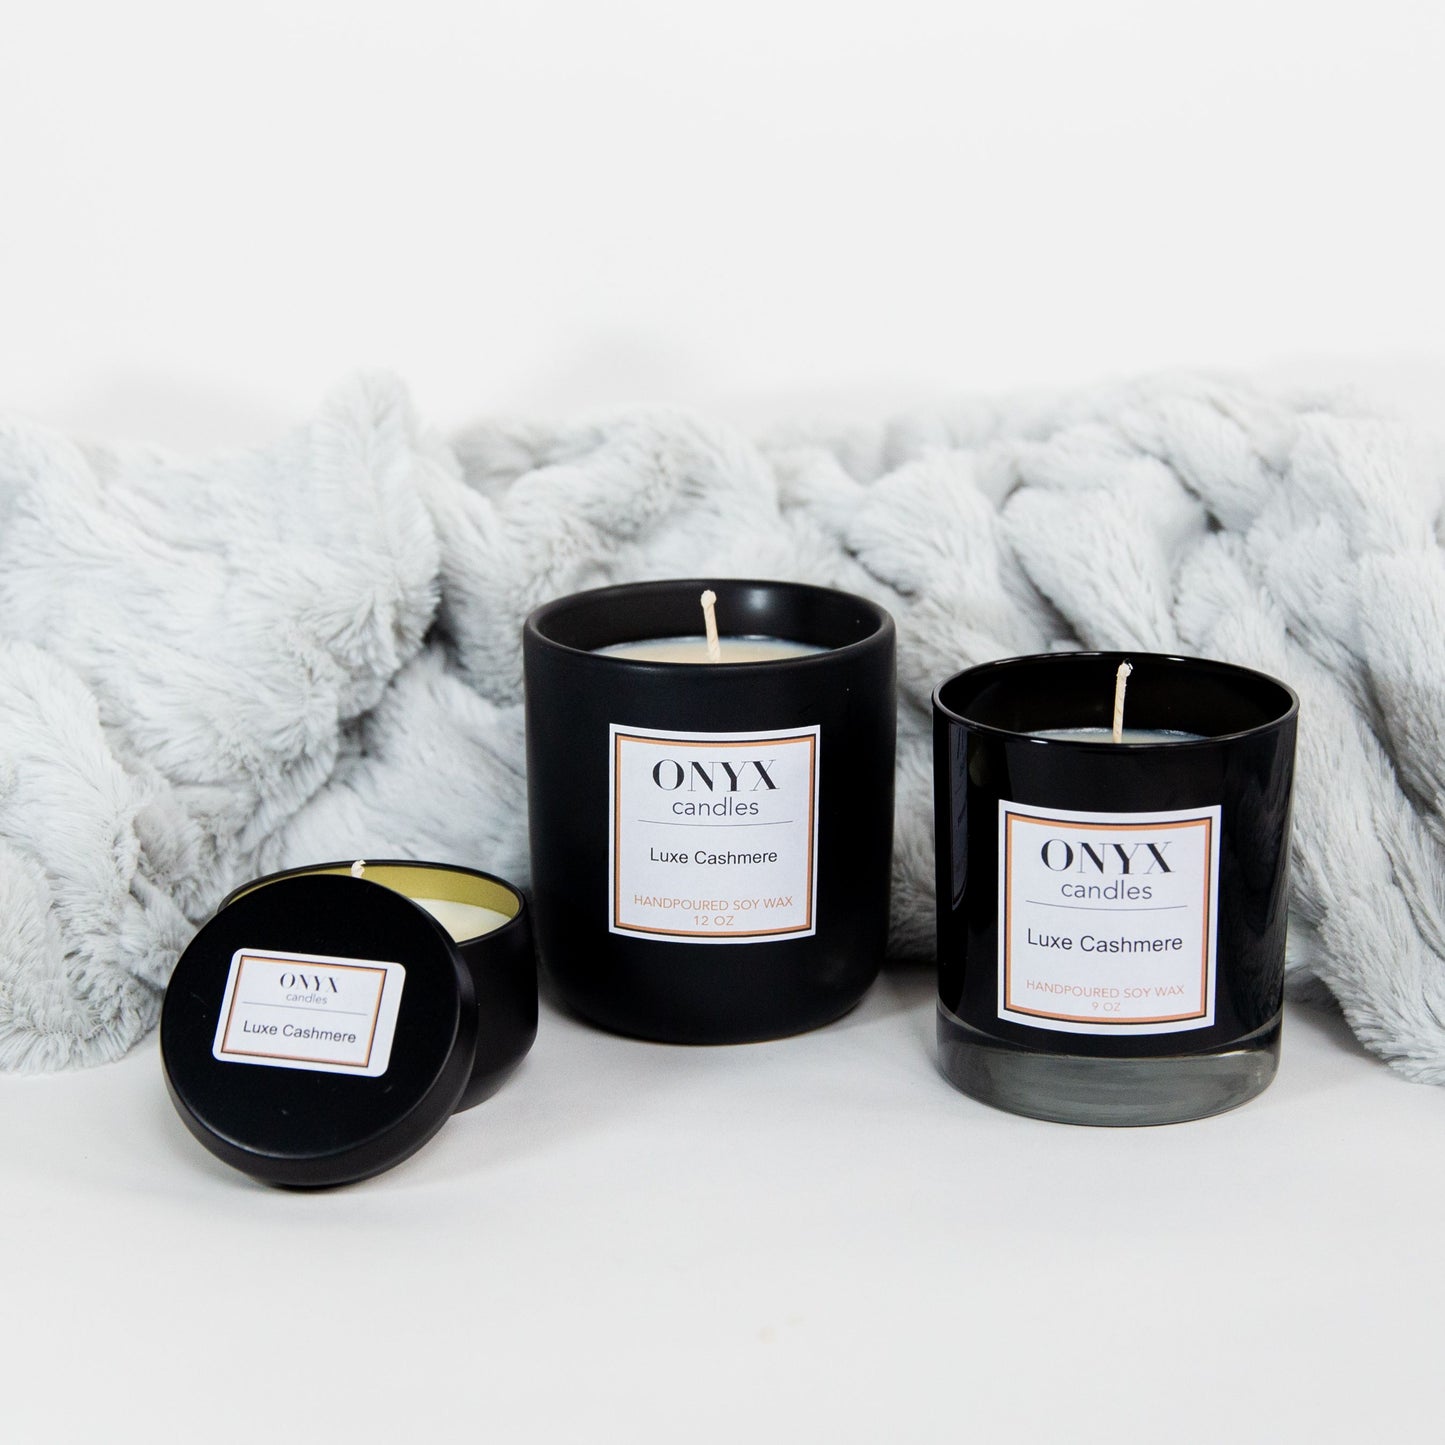 three size variants of Onyx candles scent Luxe Cashmere